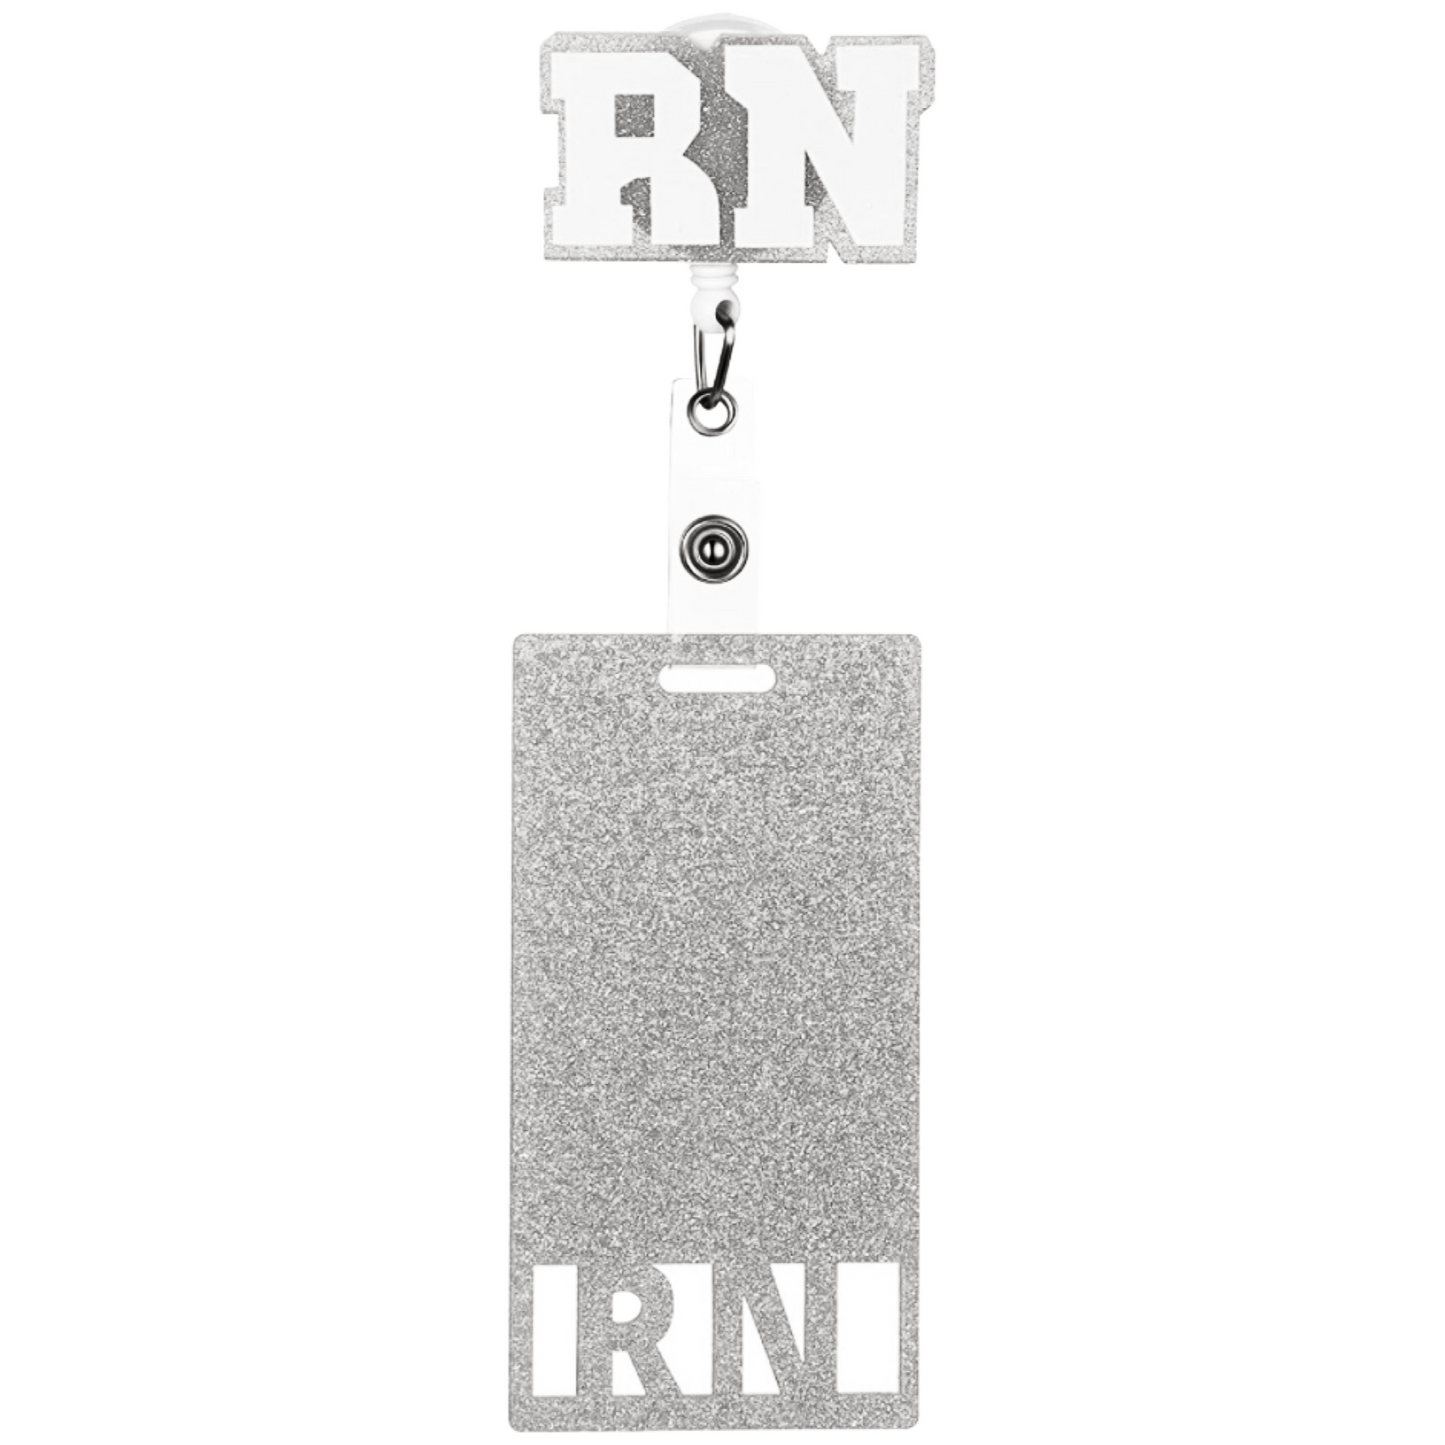 RN Badge Reel with Card